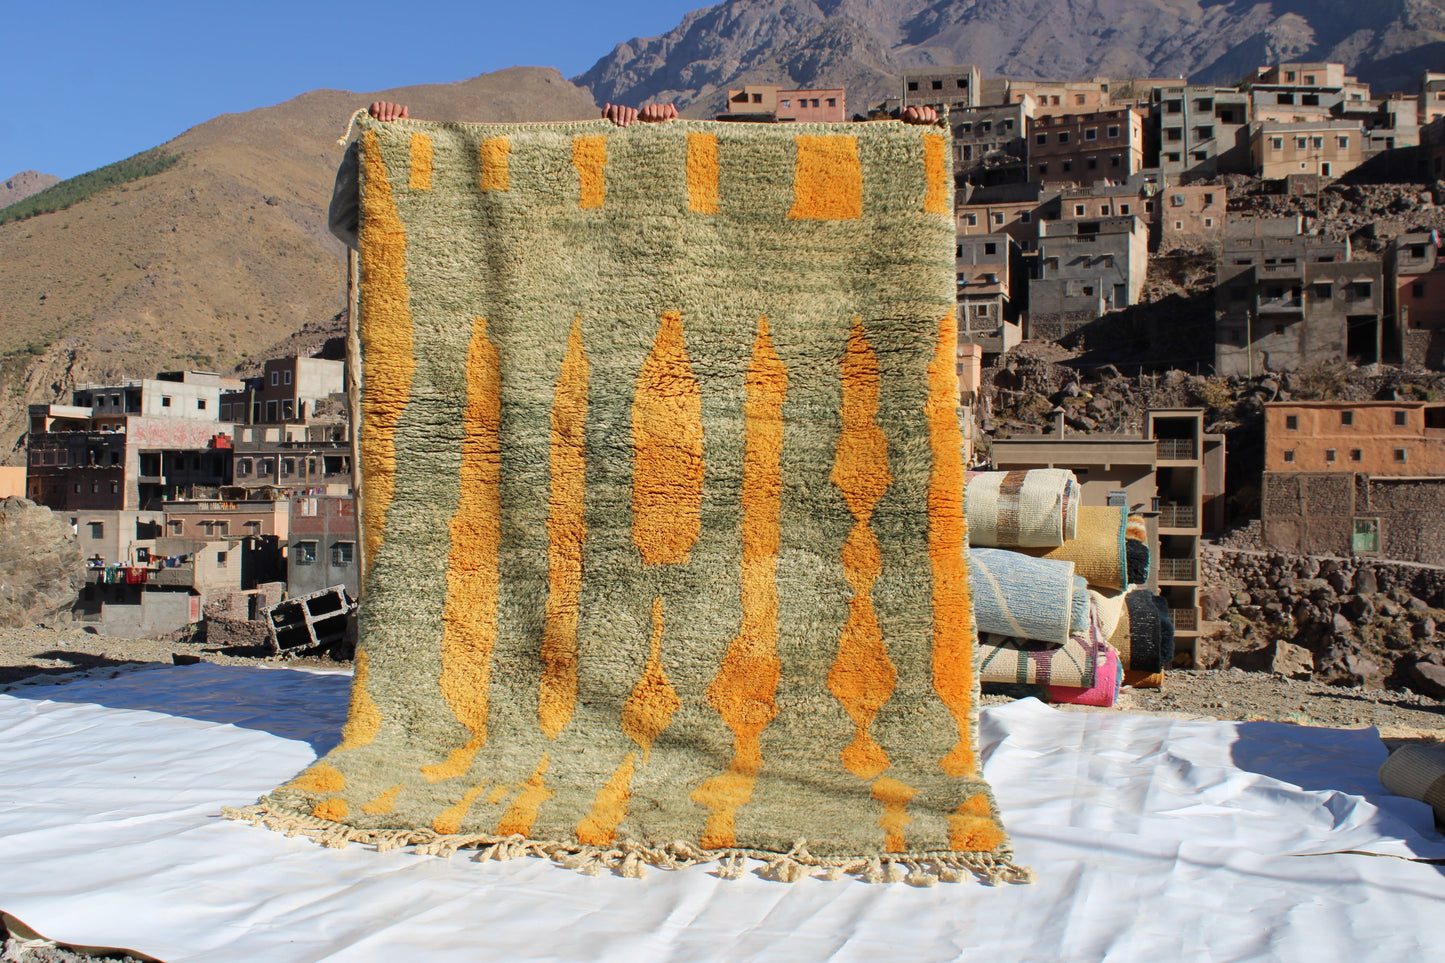 Beni Ourain rugs originate from the Atlas Mountains of Morocco and are characterized by their distinctive, neutral-toned, and geometric designs. These handwoven rugs often feature a plush pile and are made by the Berber tribes,  size is 230x155 cm